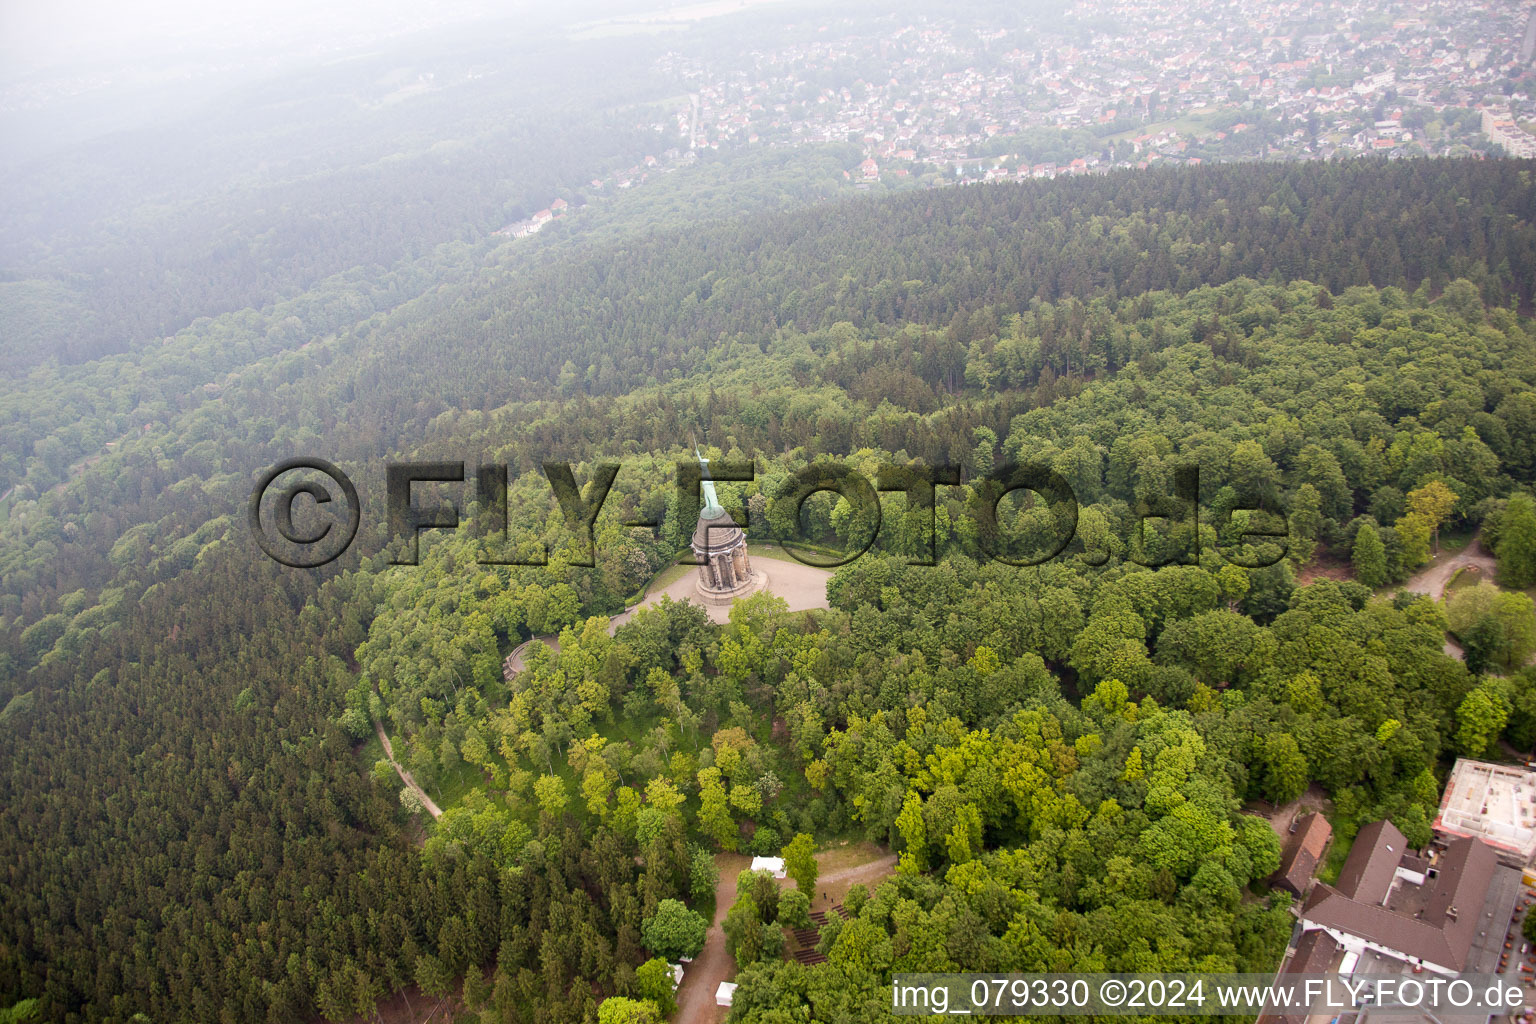 Aerial photograpy of Hermann monument in Detmold in the state North Rhine-Westphalia, Germany